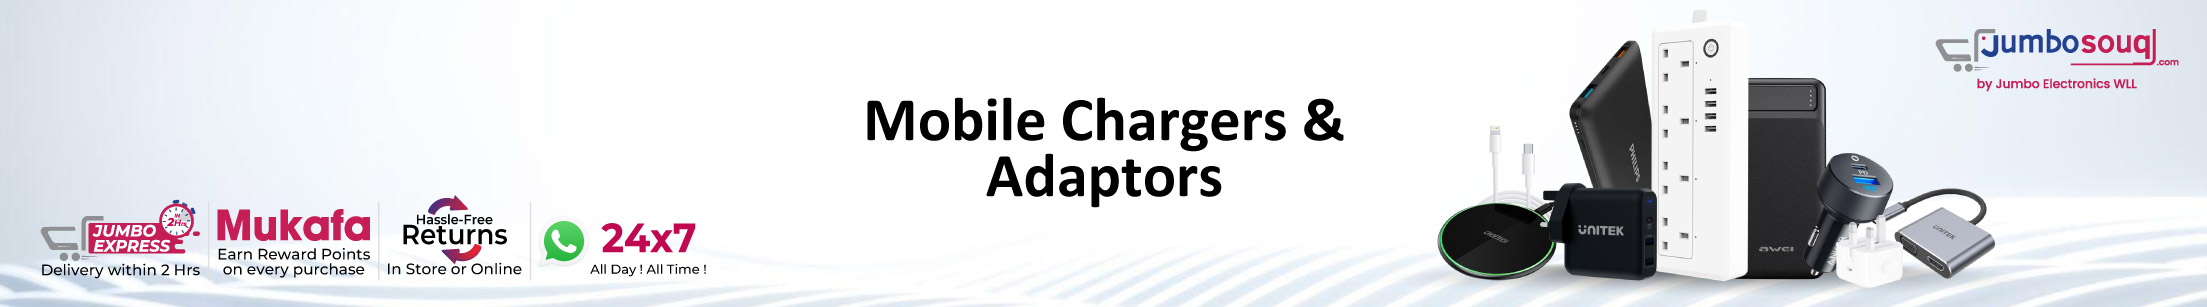 Mobile Chargers & Adaptors